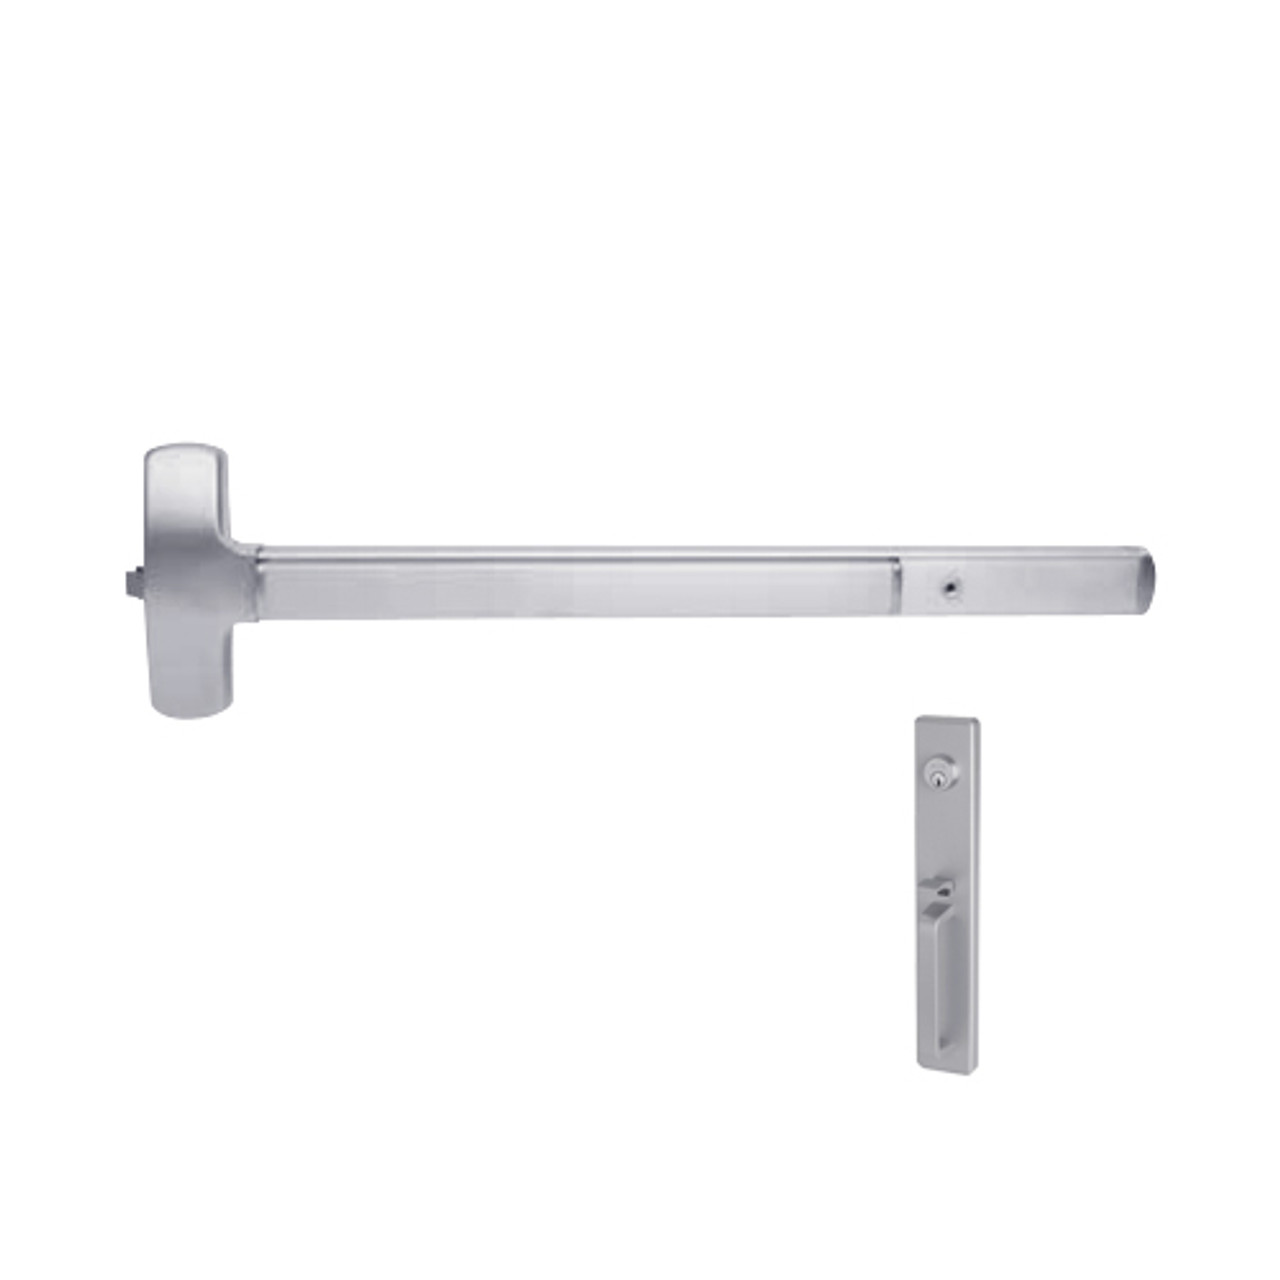 25-R-TP-US32-4 Falcon Exit Device in Polished Stainless Steel